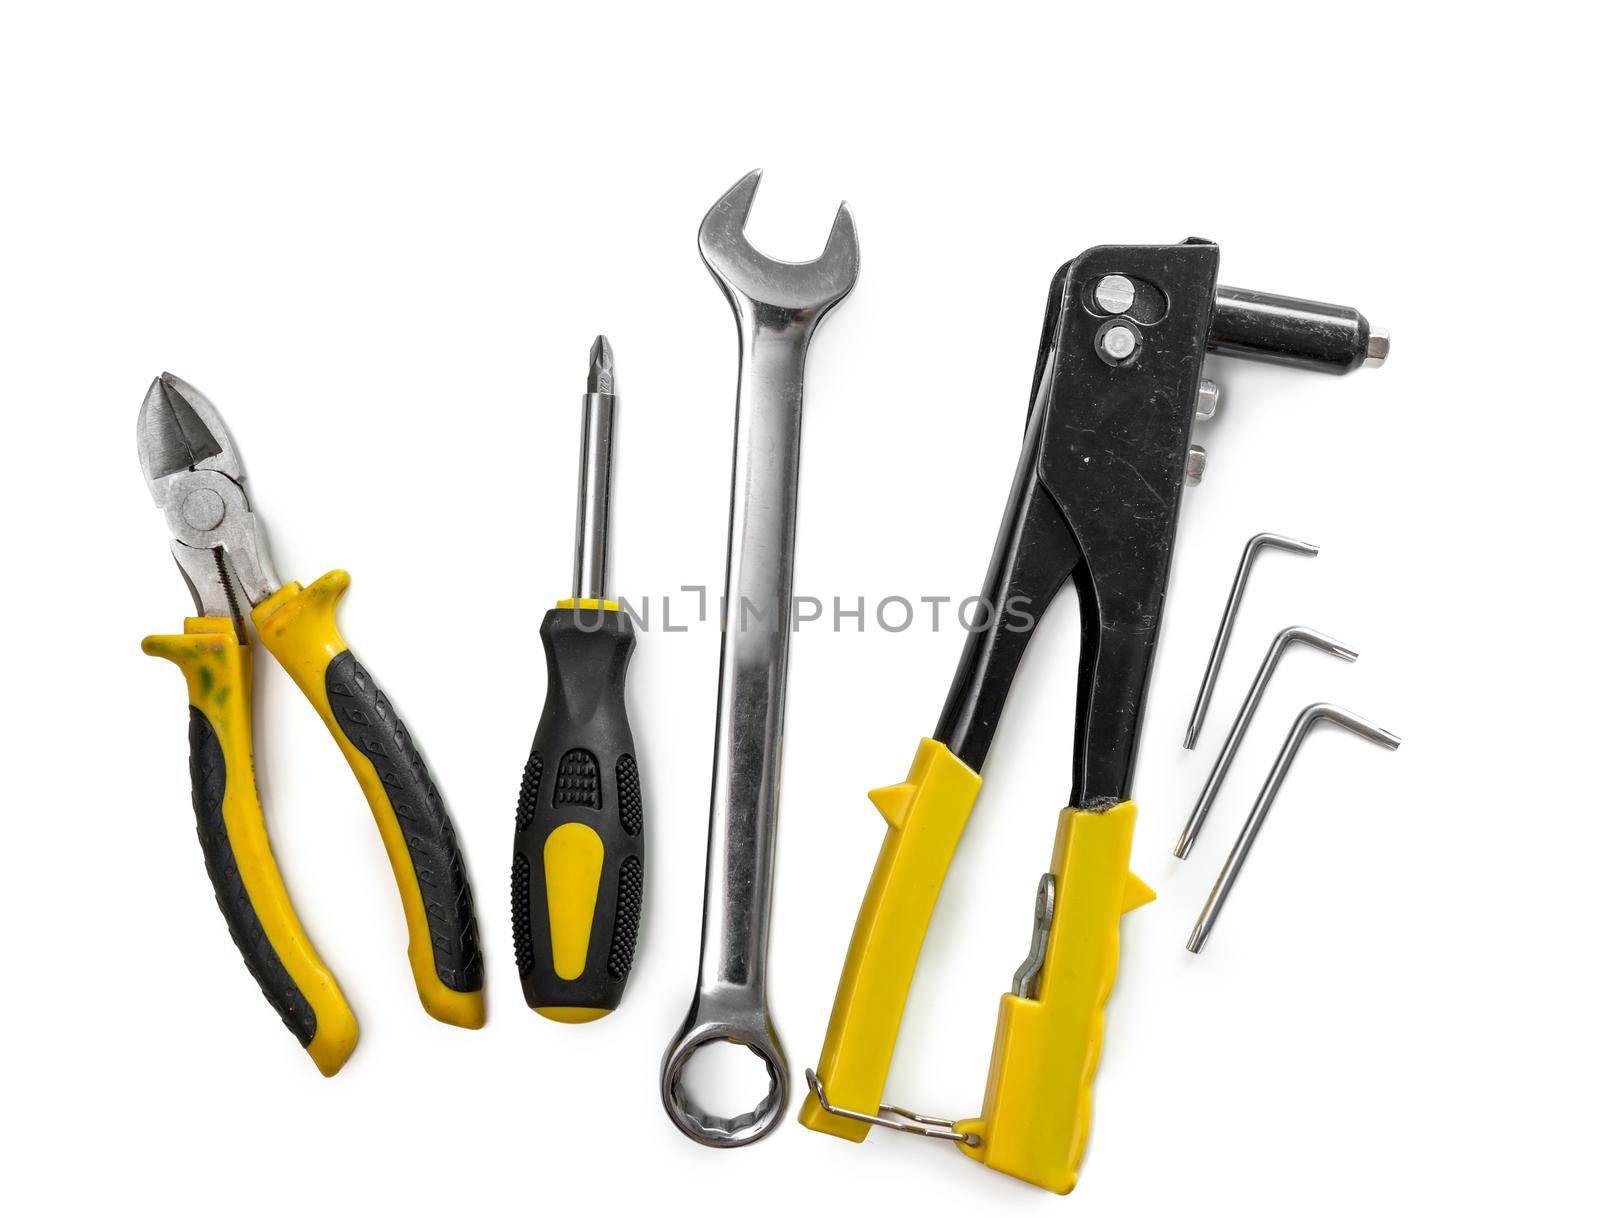 toolkit of different instruments isolated on white background